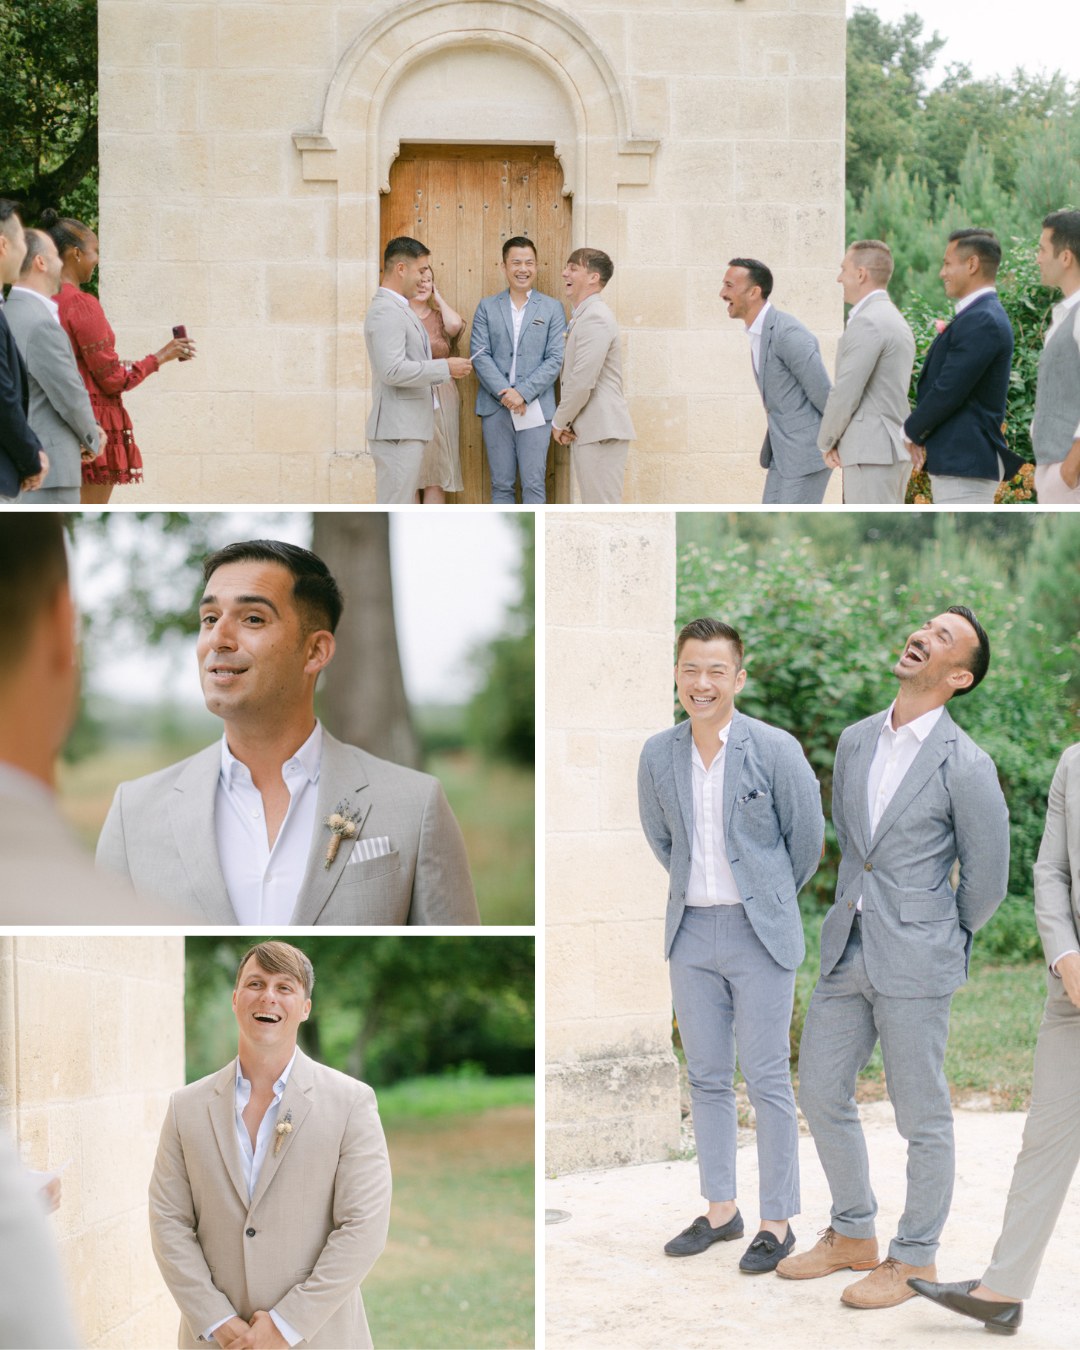 A collage of five images from a wedding ceremony. The groom, dressed in a light gray suit, is seen laughing and standing with several groomsmen, all in similar suits. The outdoor setting includes a stone archway and greenery. The mood is joyous and celebratory.